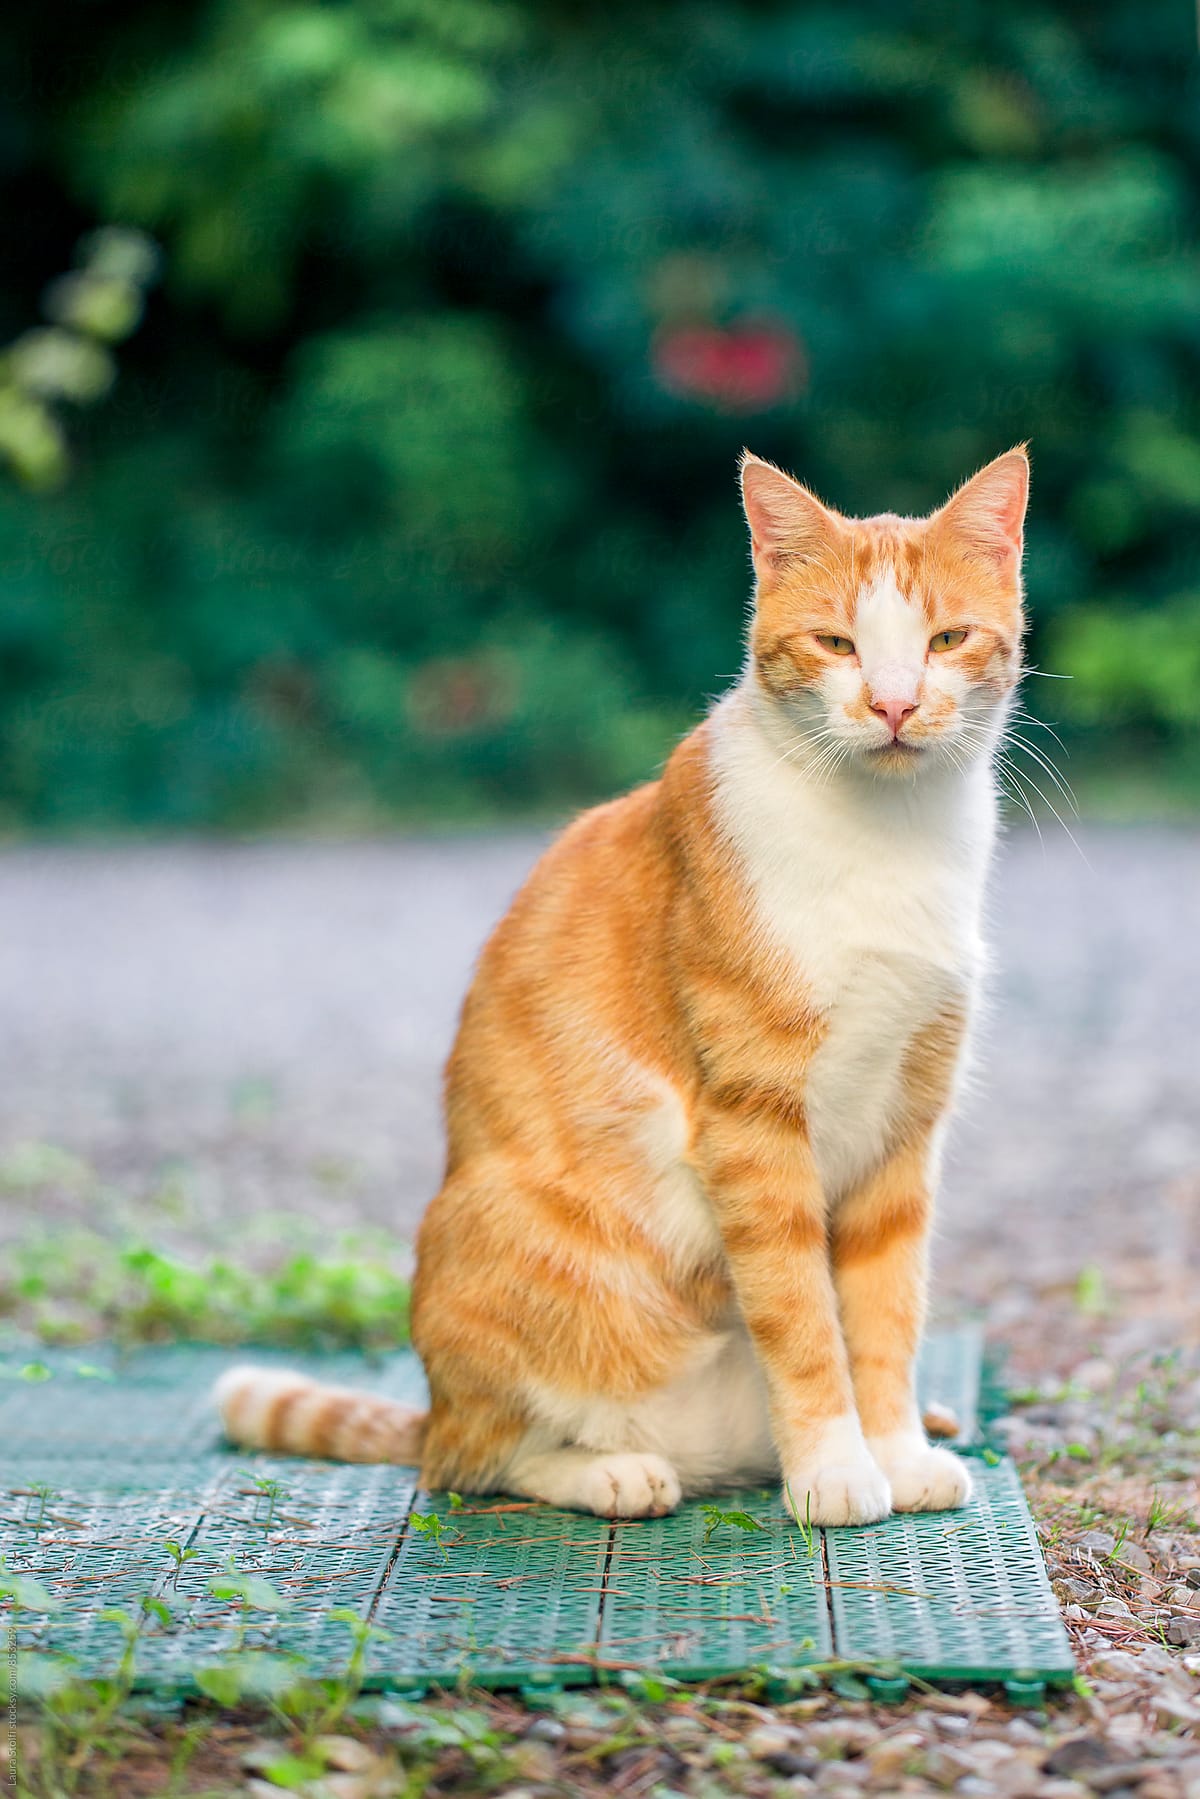 Adult red cat sits in garden and looks straight at the camera